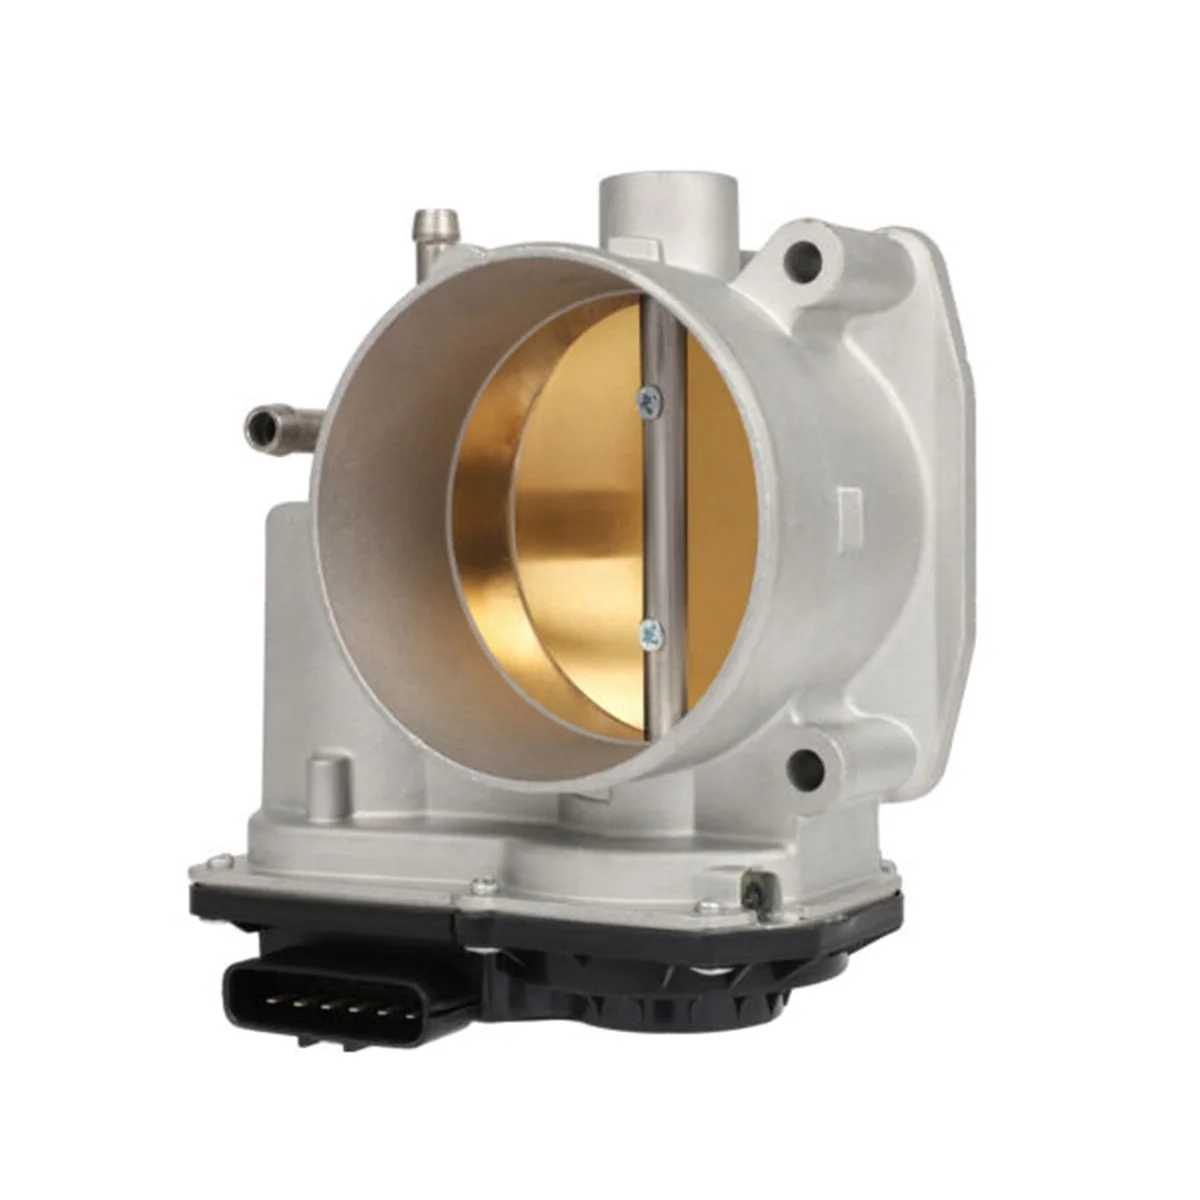 

22030-0S021 Throttle Body Throttle Body Automobile for Toyota Camry Lexus Rx350 Rx450H 3.5L